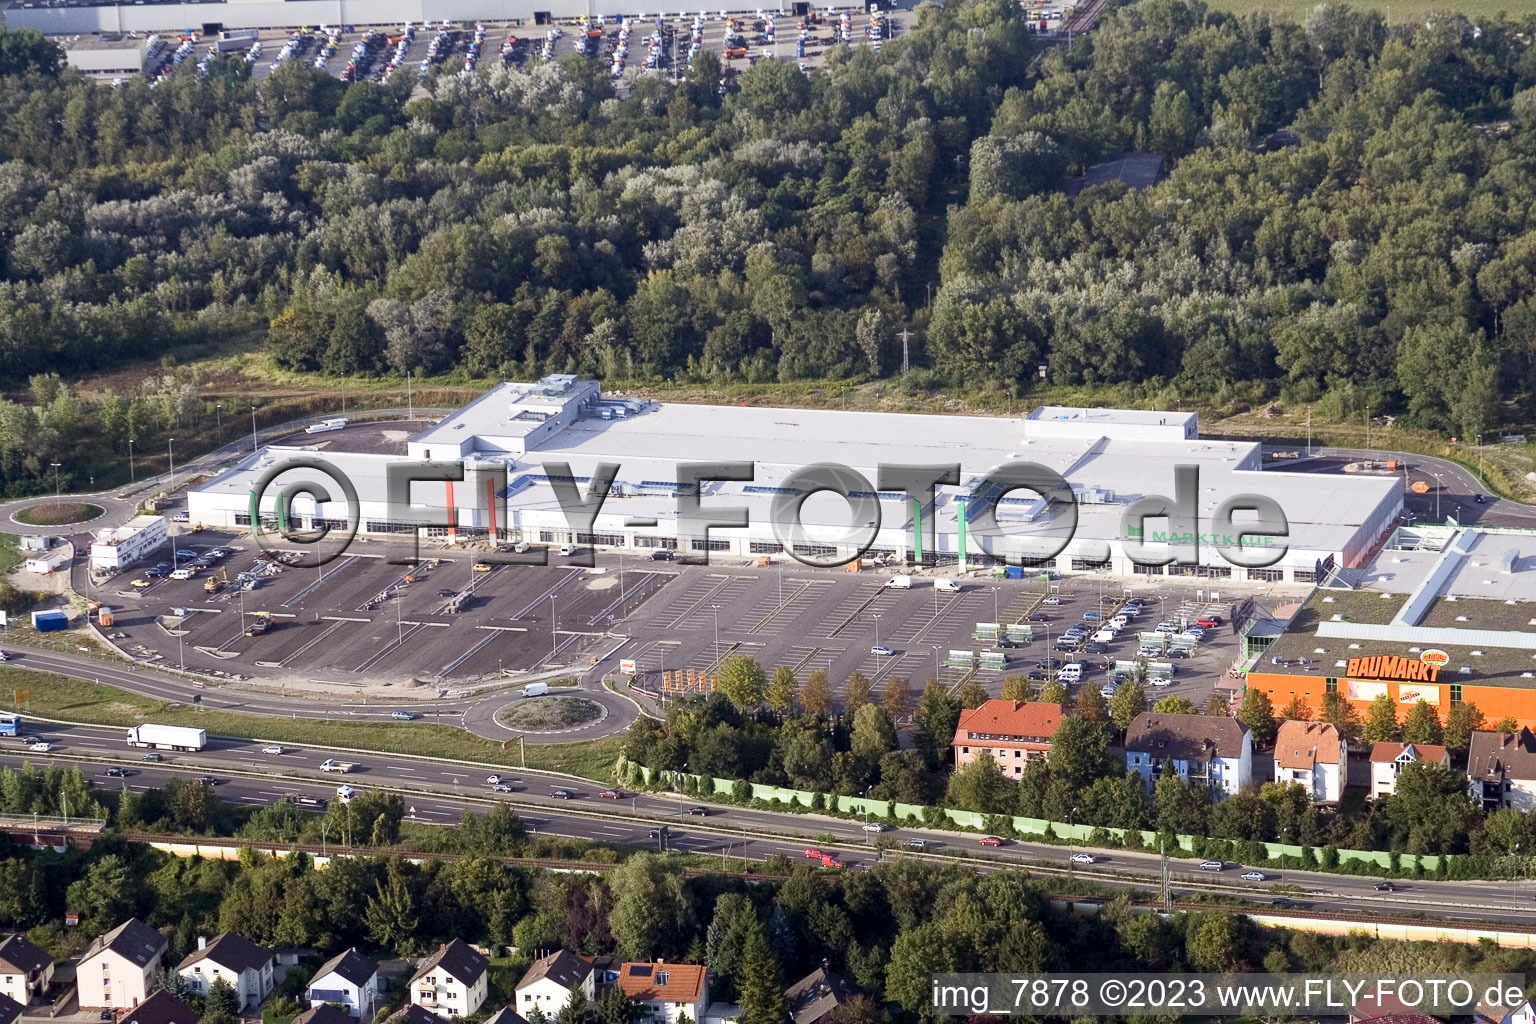 Aerial photograpy of Retail center in the district Maximiliansau in Wörth am Rhein in the state Rhineland-Palatinate, Germany